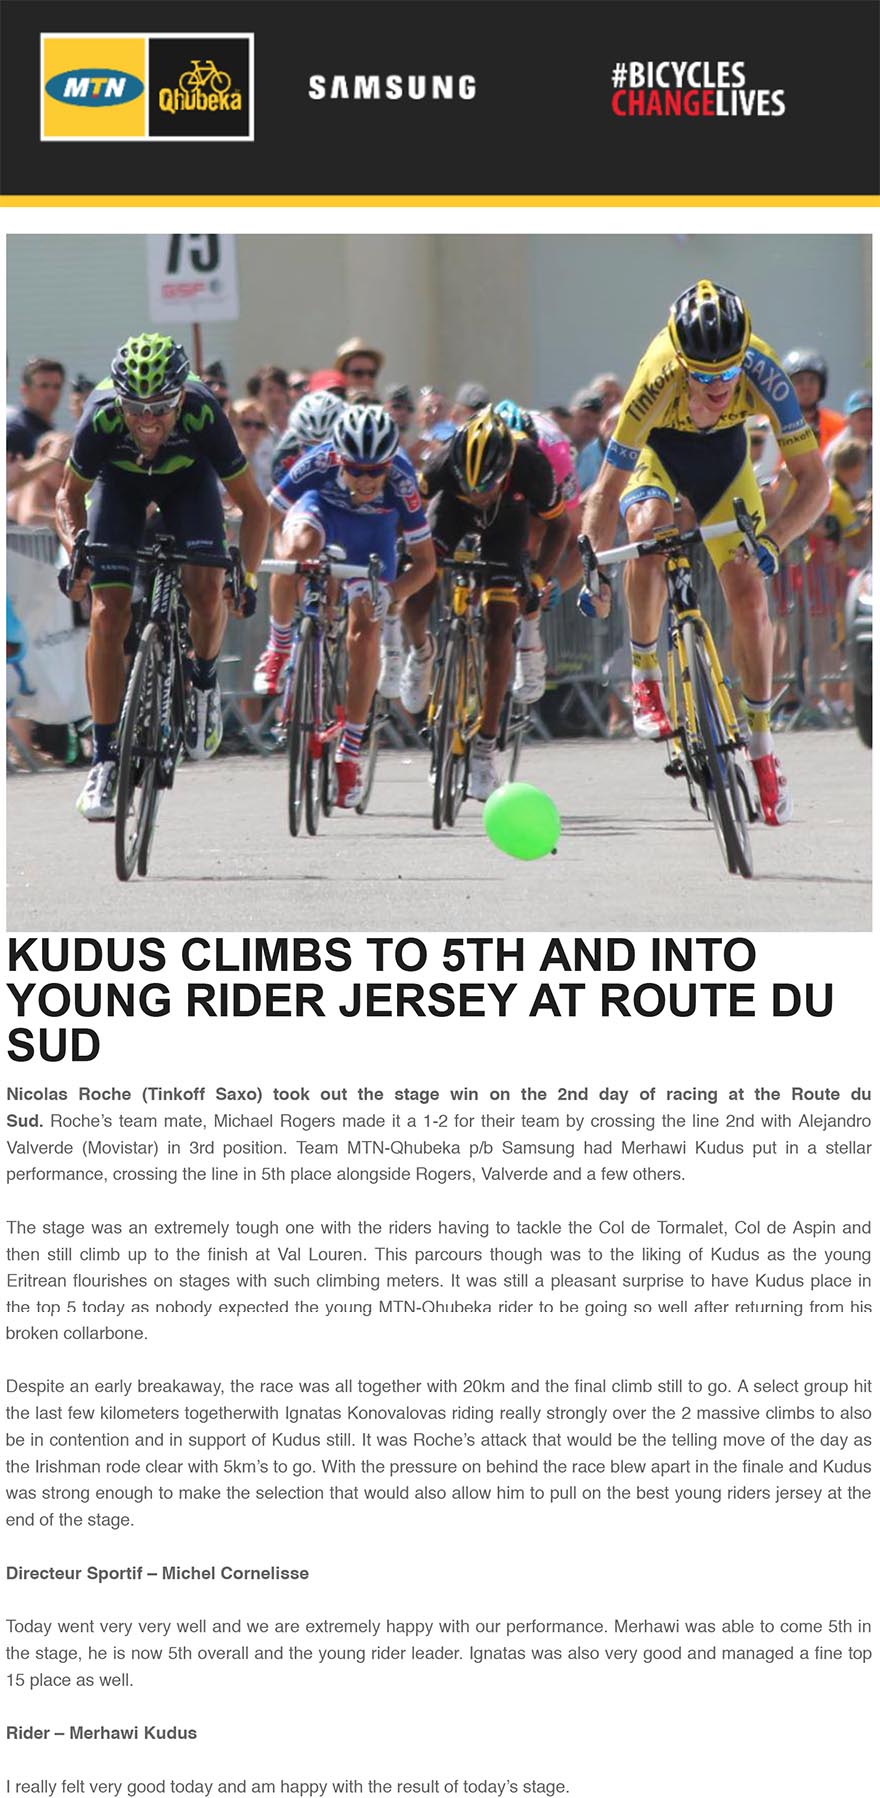 KUDUS CLIMBS TO 5TH AND INTO YOUNG RIDER JERSEY AT ROUTE DU SUD